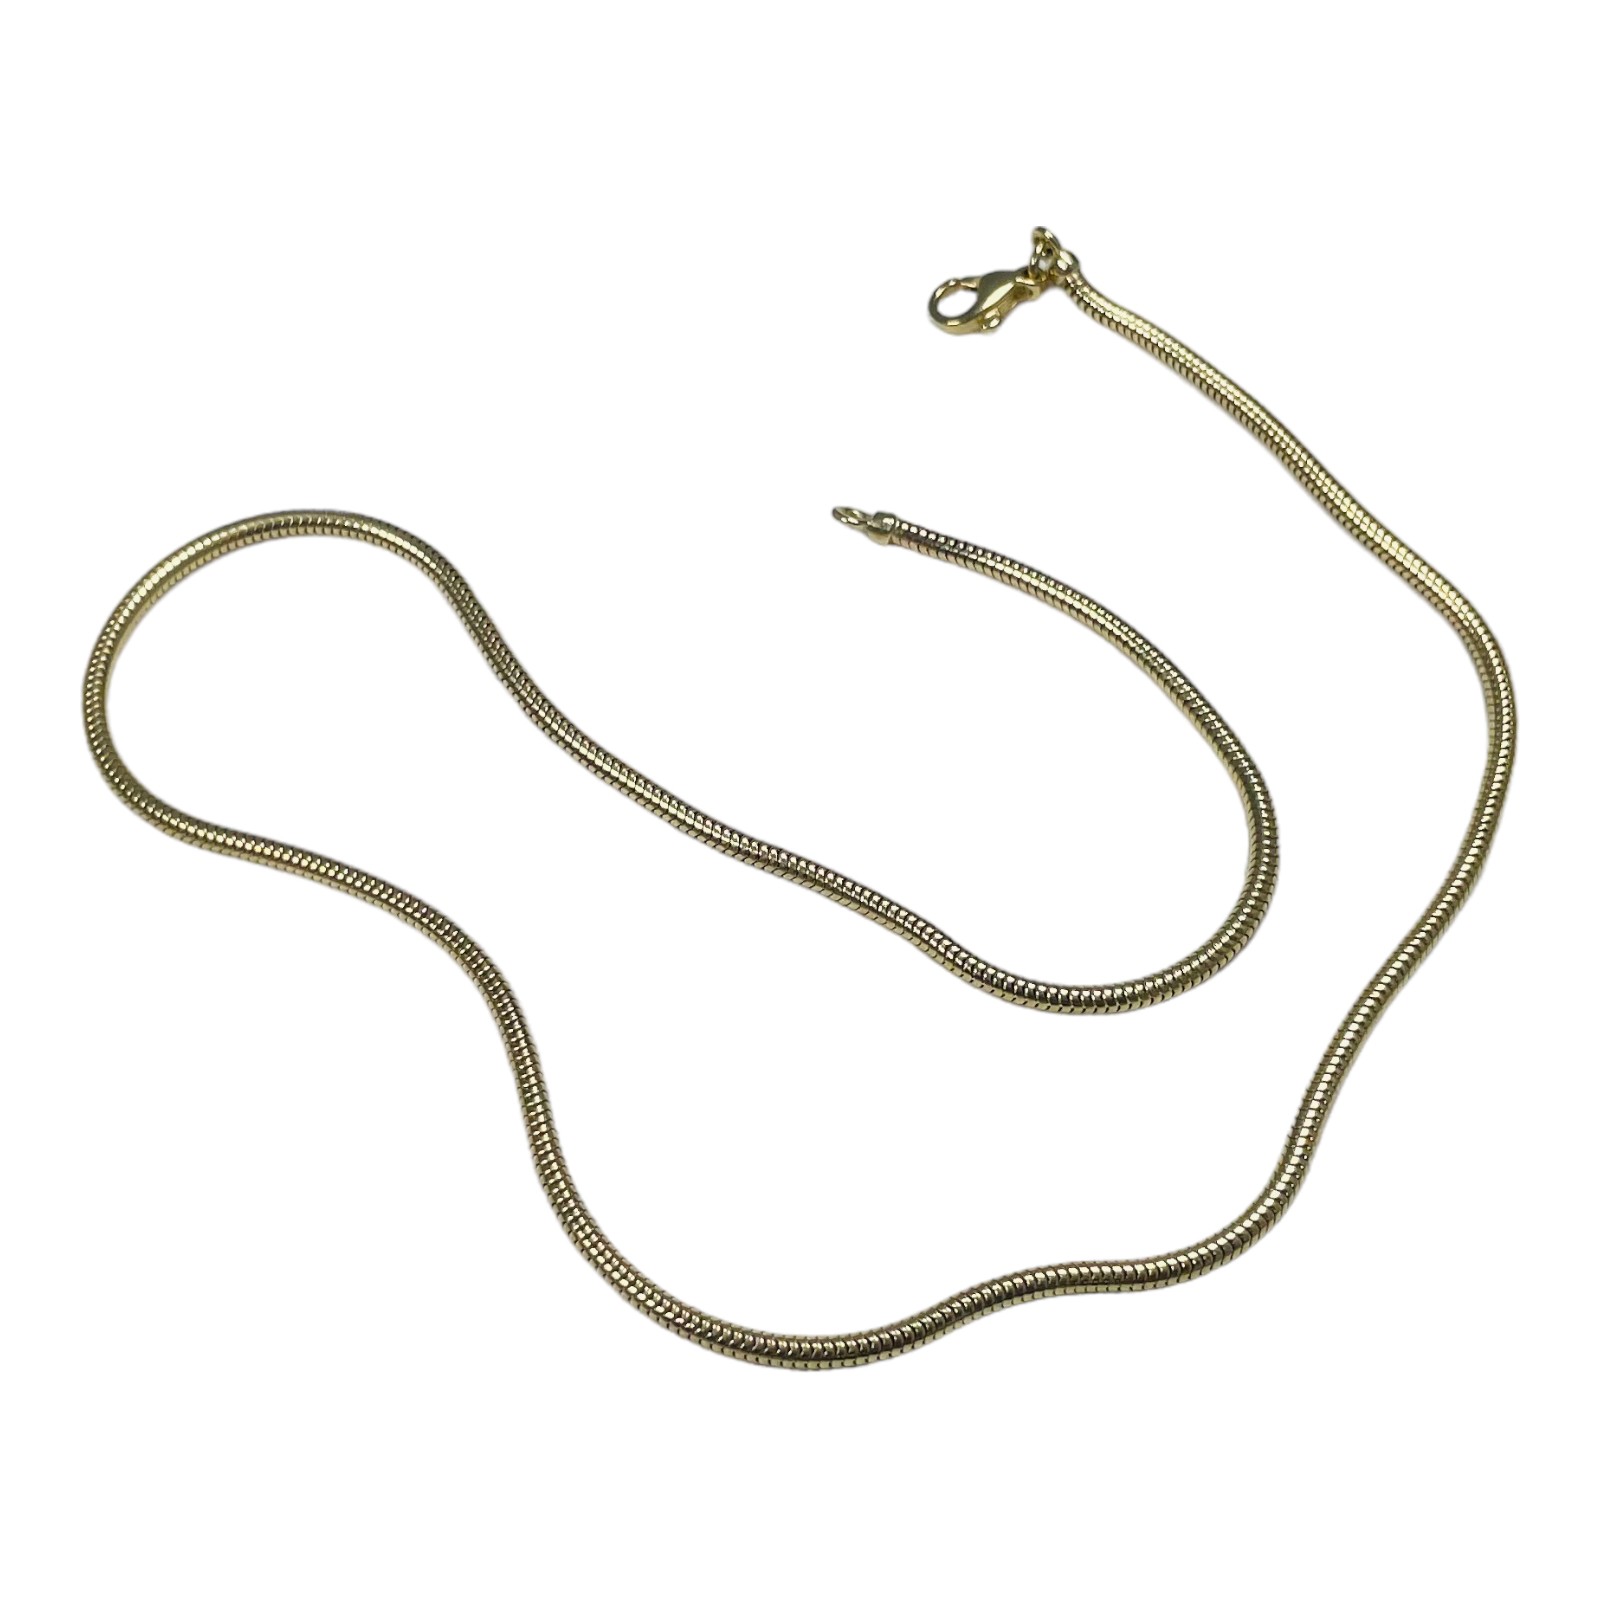 A 9ct yellow gold snake link chain, 18 inches in length, weighs 12.9 grams, Birmingham hallmarks.